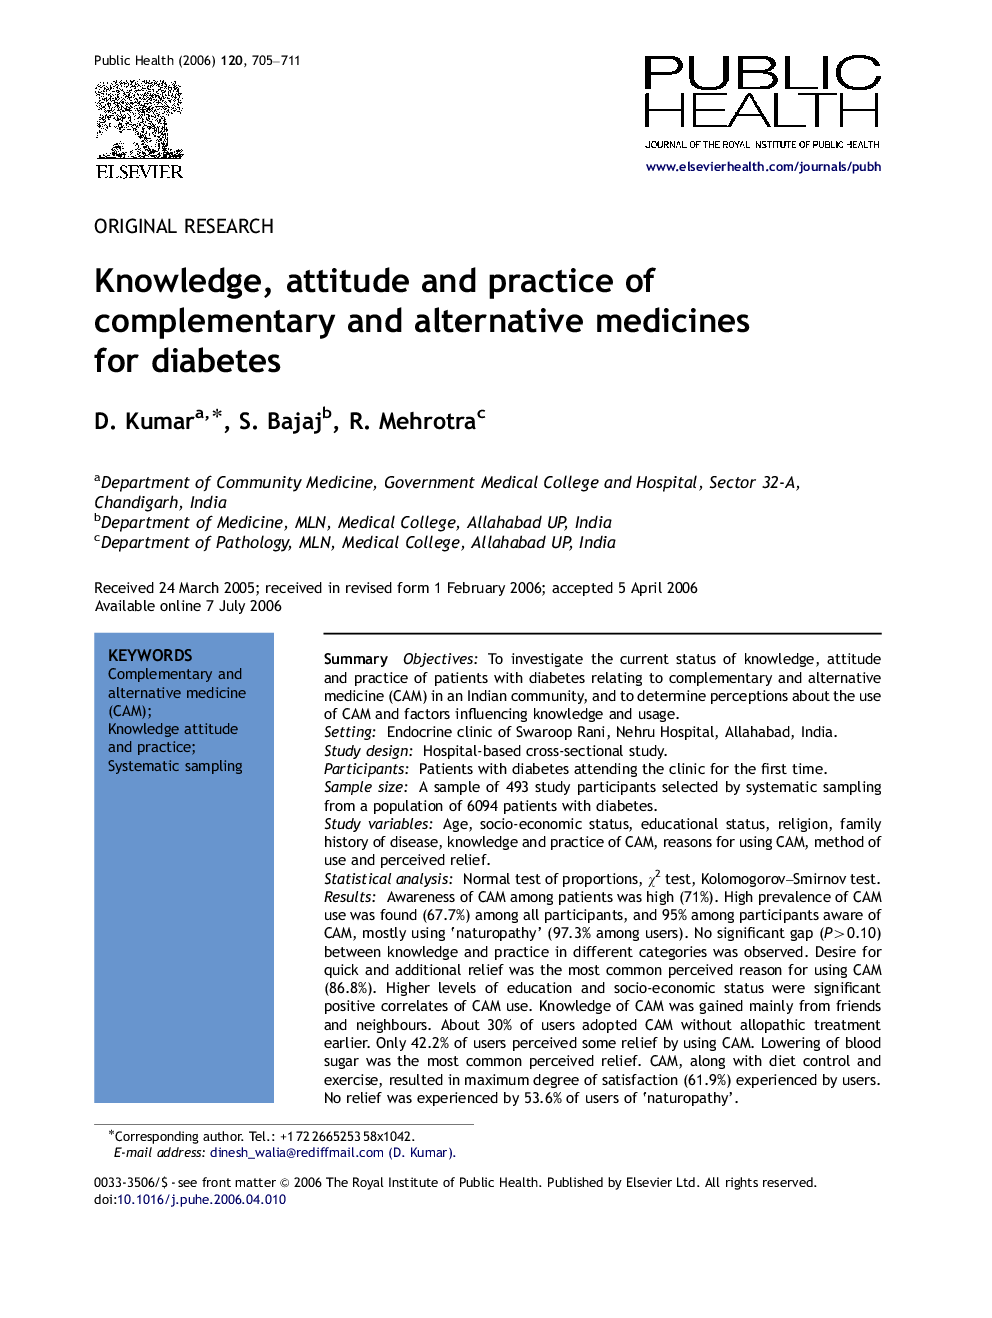 Knowledge, attitude and practice of complementary and alternative medicines for diabetes